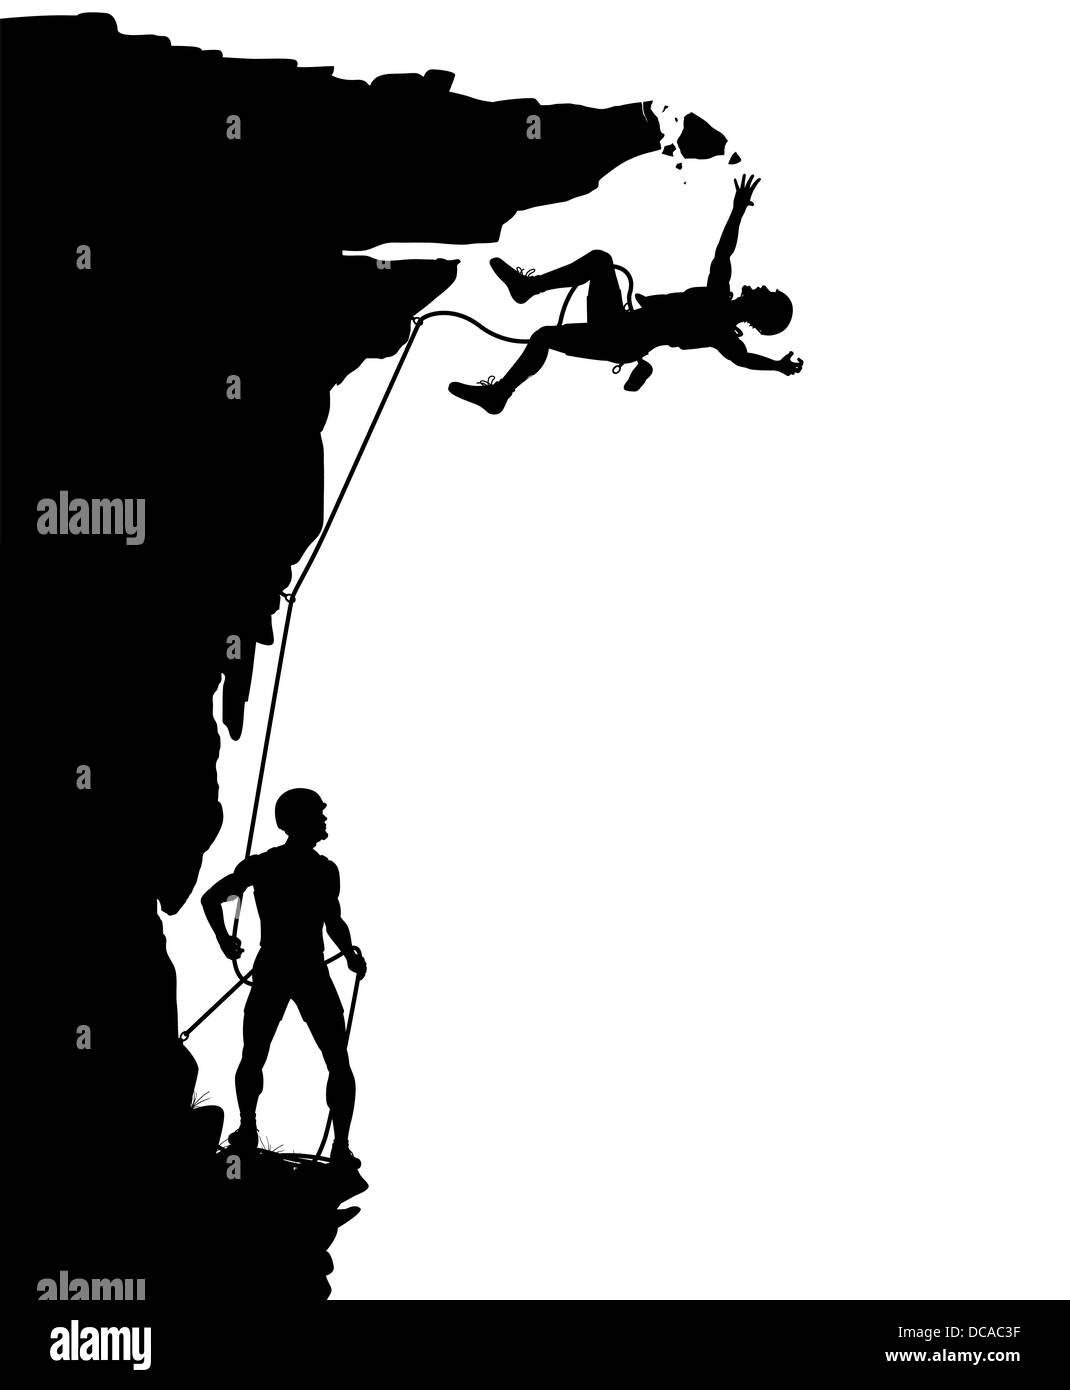 Climber falling Black and White Stock Photos & Images - Alamy